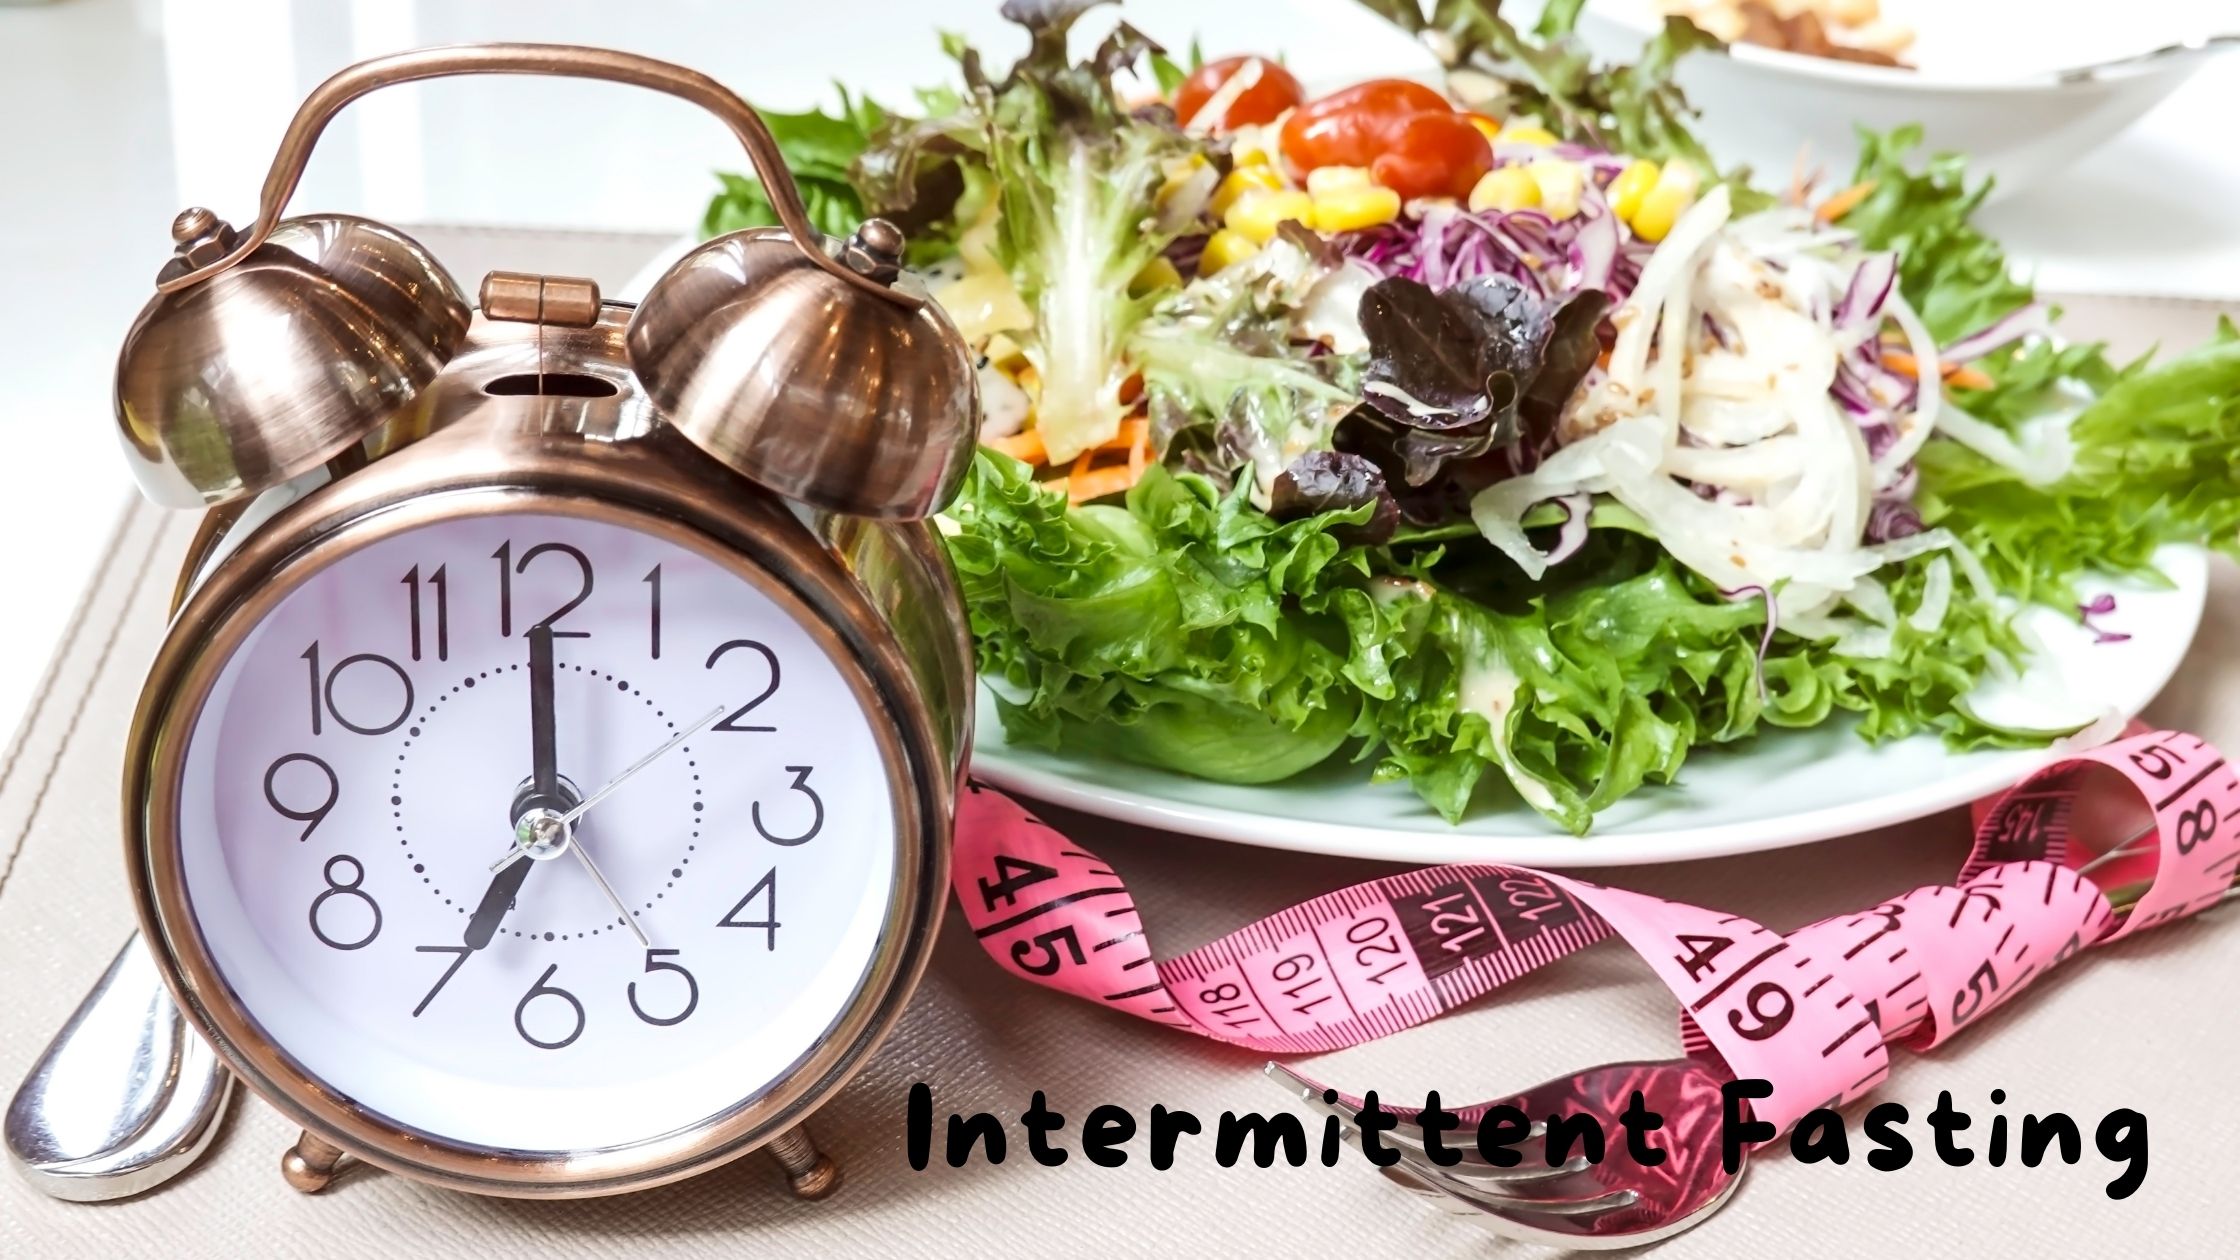 Intermittent Fasting is the Newest Weight Loss Craze